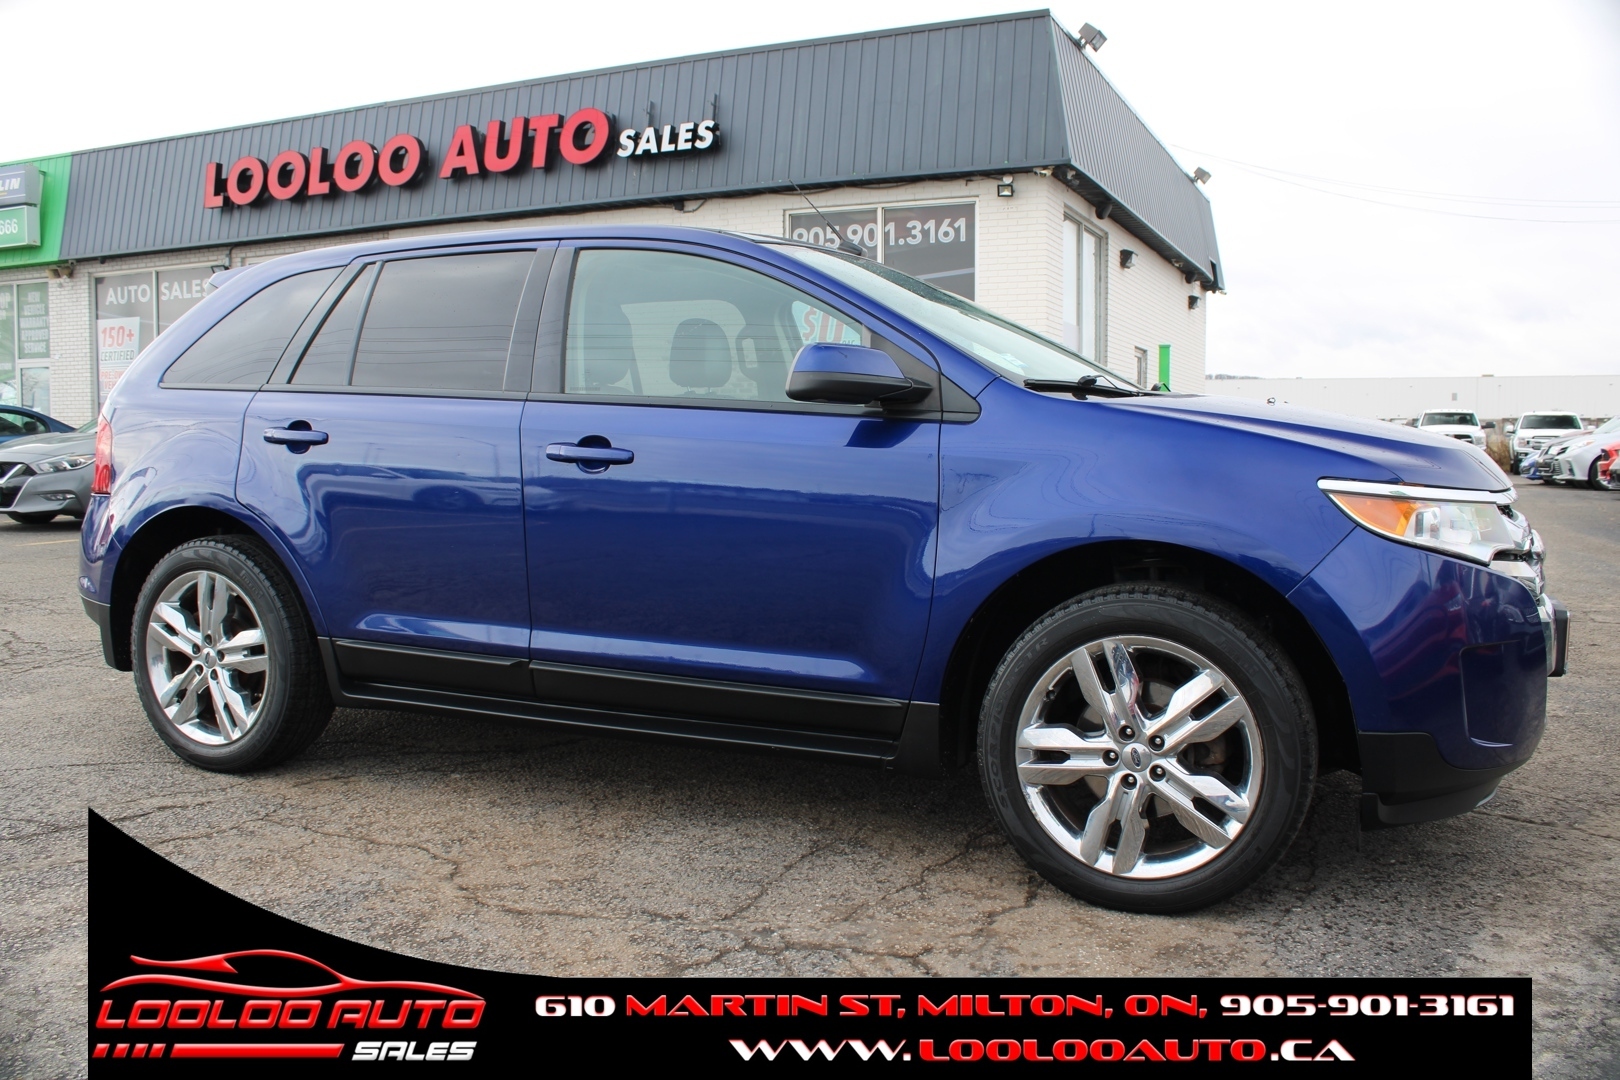 2014 Ford Edge SEL Navigation Leather Panoramic Sunroof $118/Week